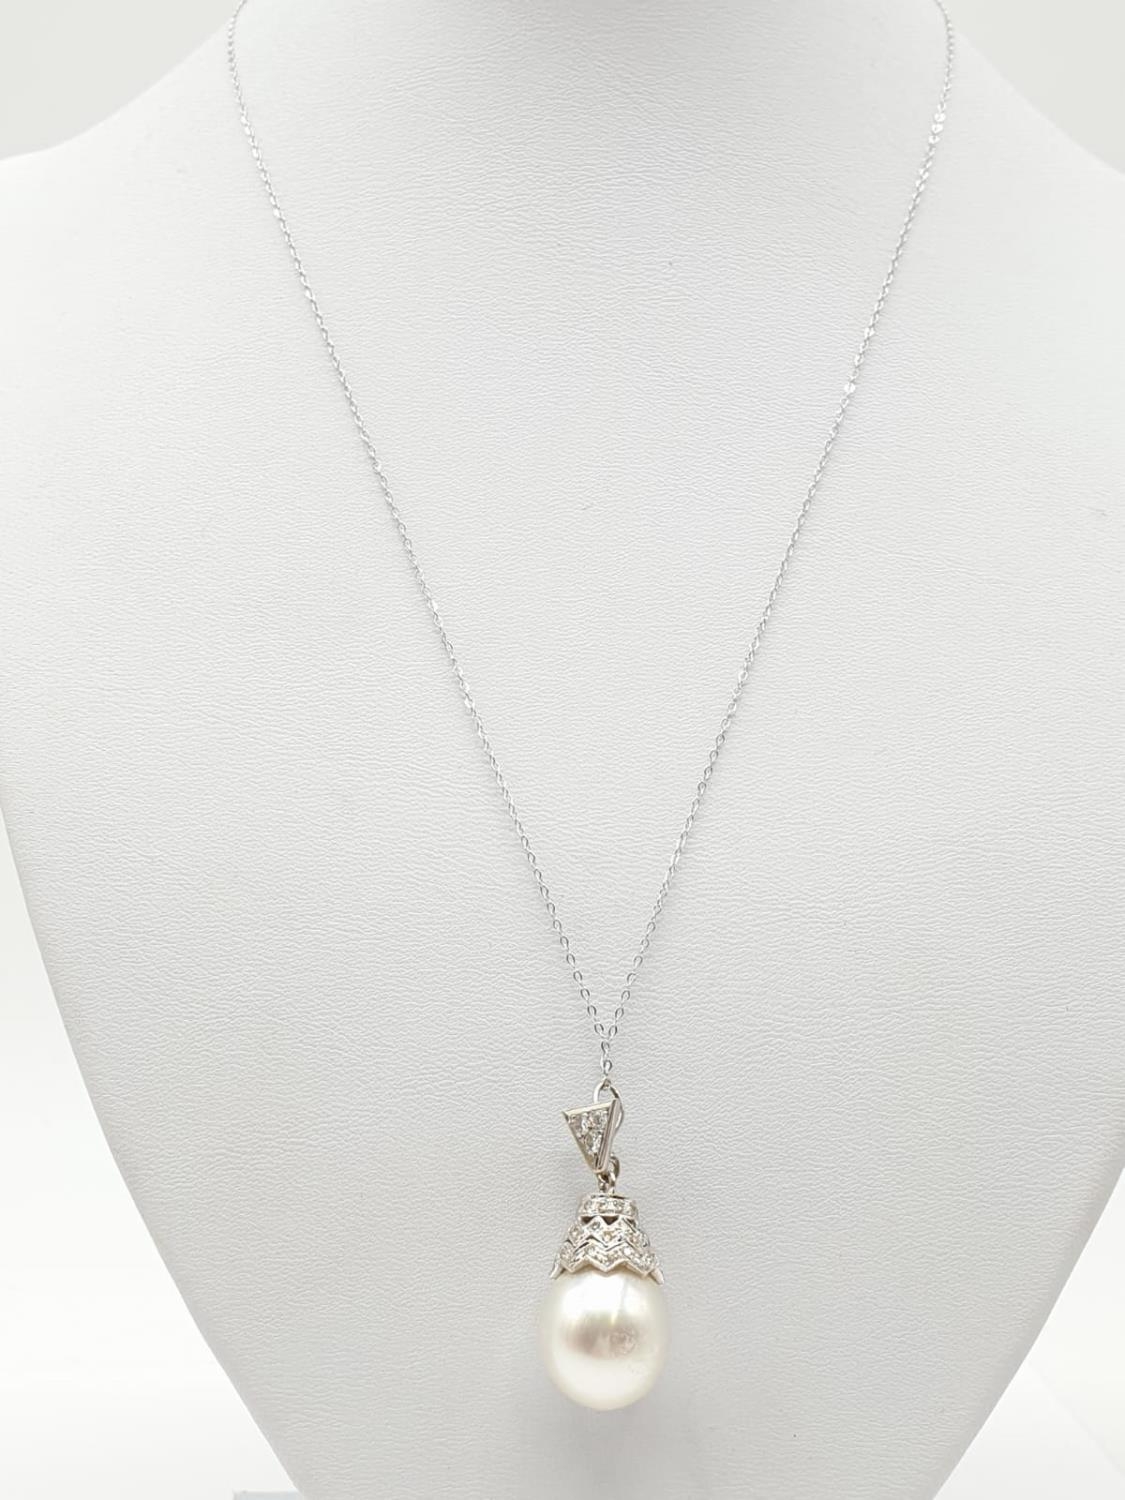 South Sea pearl PENDANT with Diamonds . 18ct chain. 7.6g 40cm - Image 2 of 4